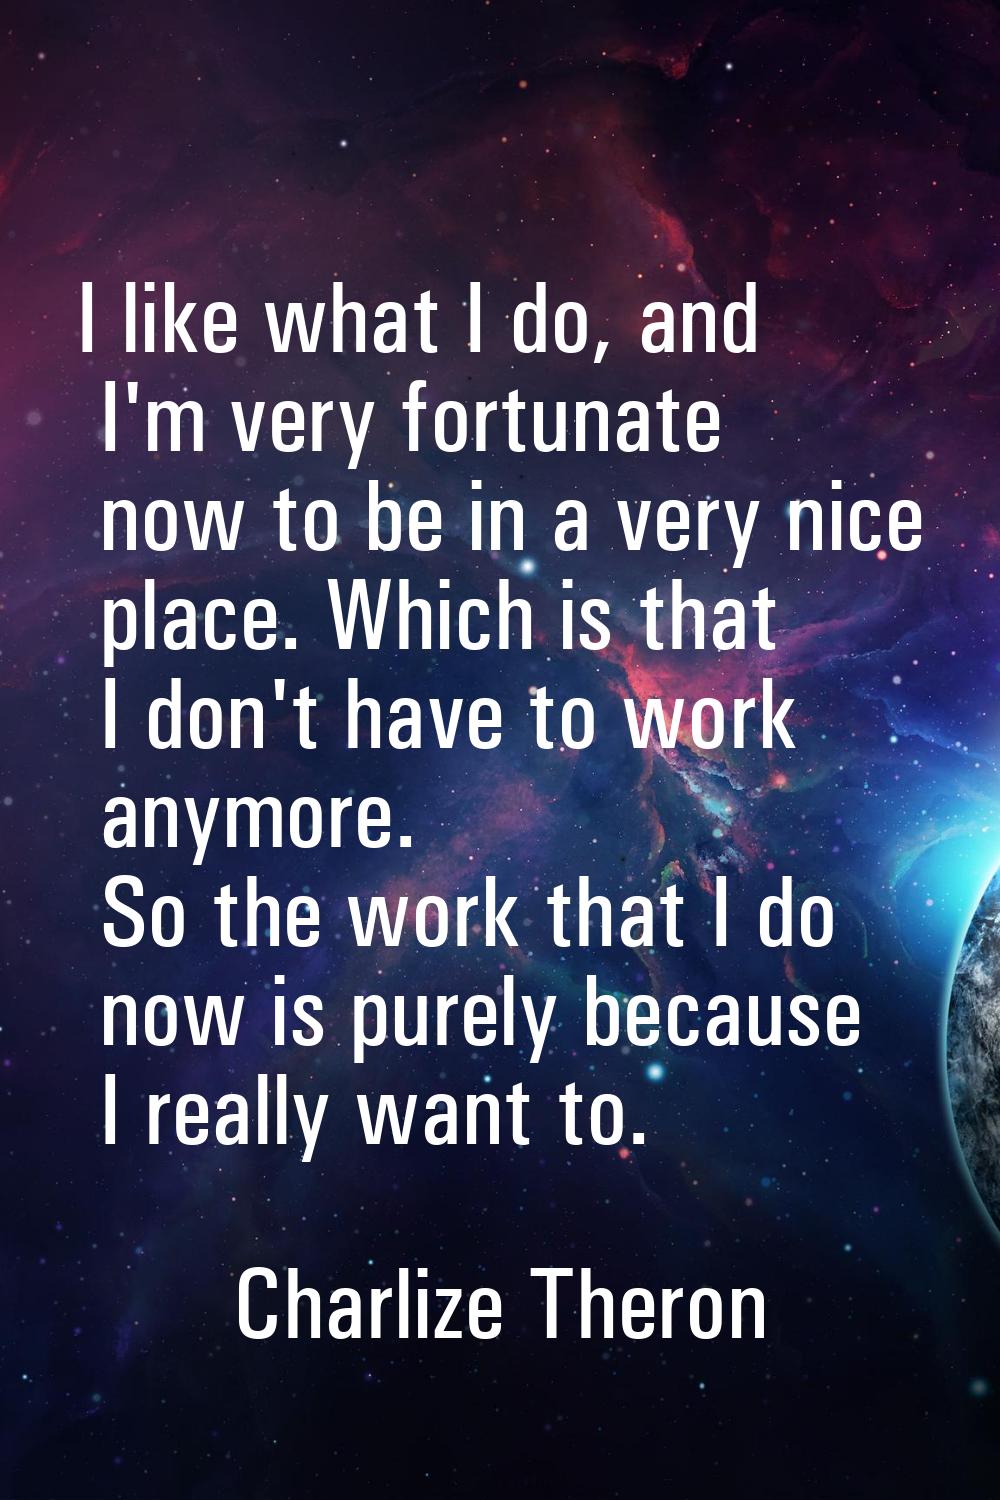 I like what I do, and I'm very fortunate now to be in a very nice place. Which is that I don't have